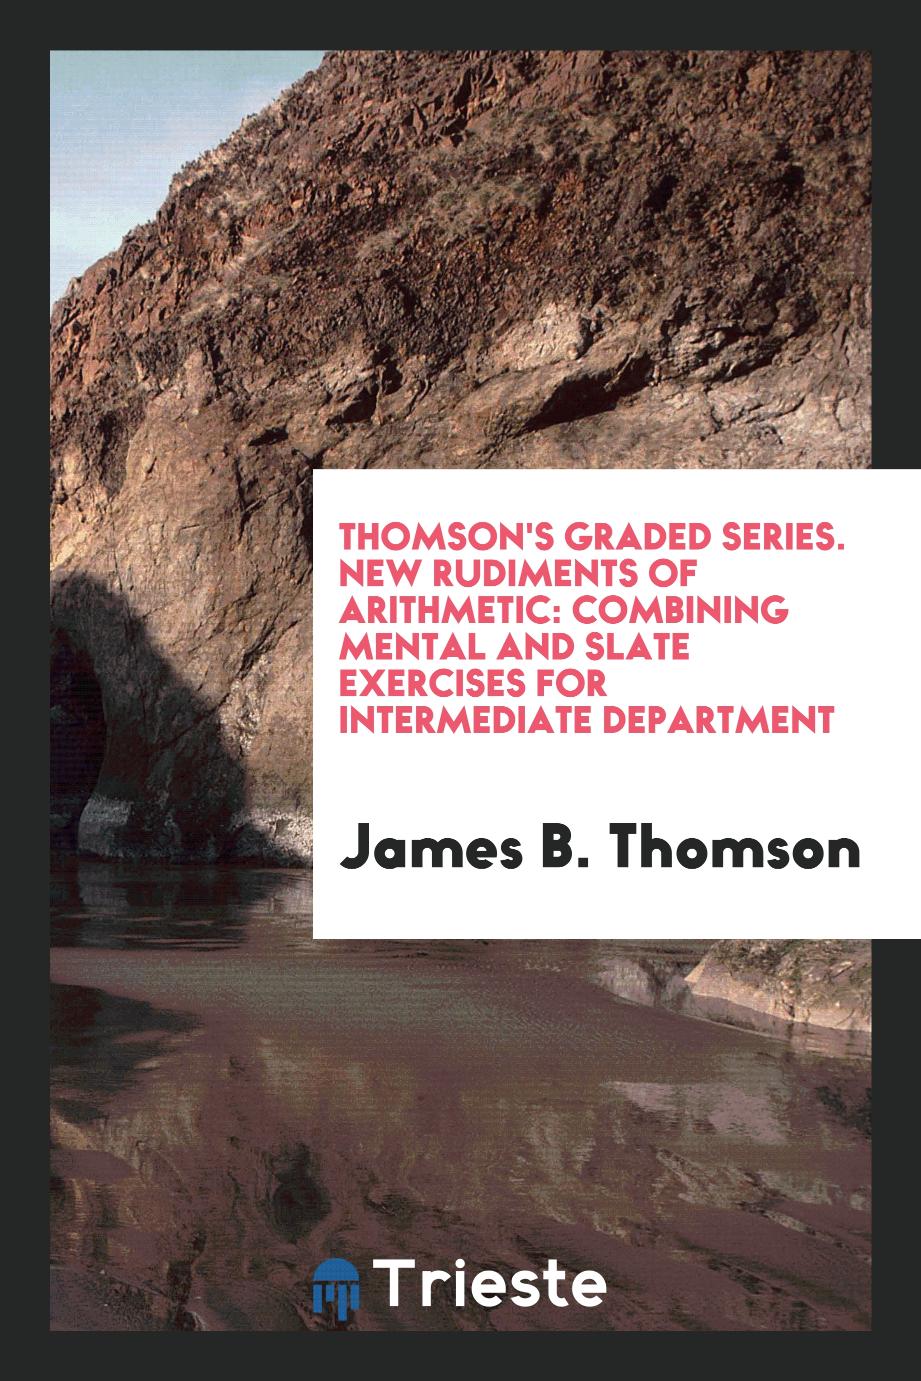 Thomson's Graded Series. New Rudiments of Arithmetic: Combining Mental and Slate Exercises for Intermediate Department